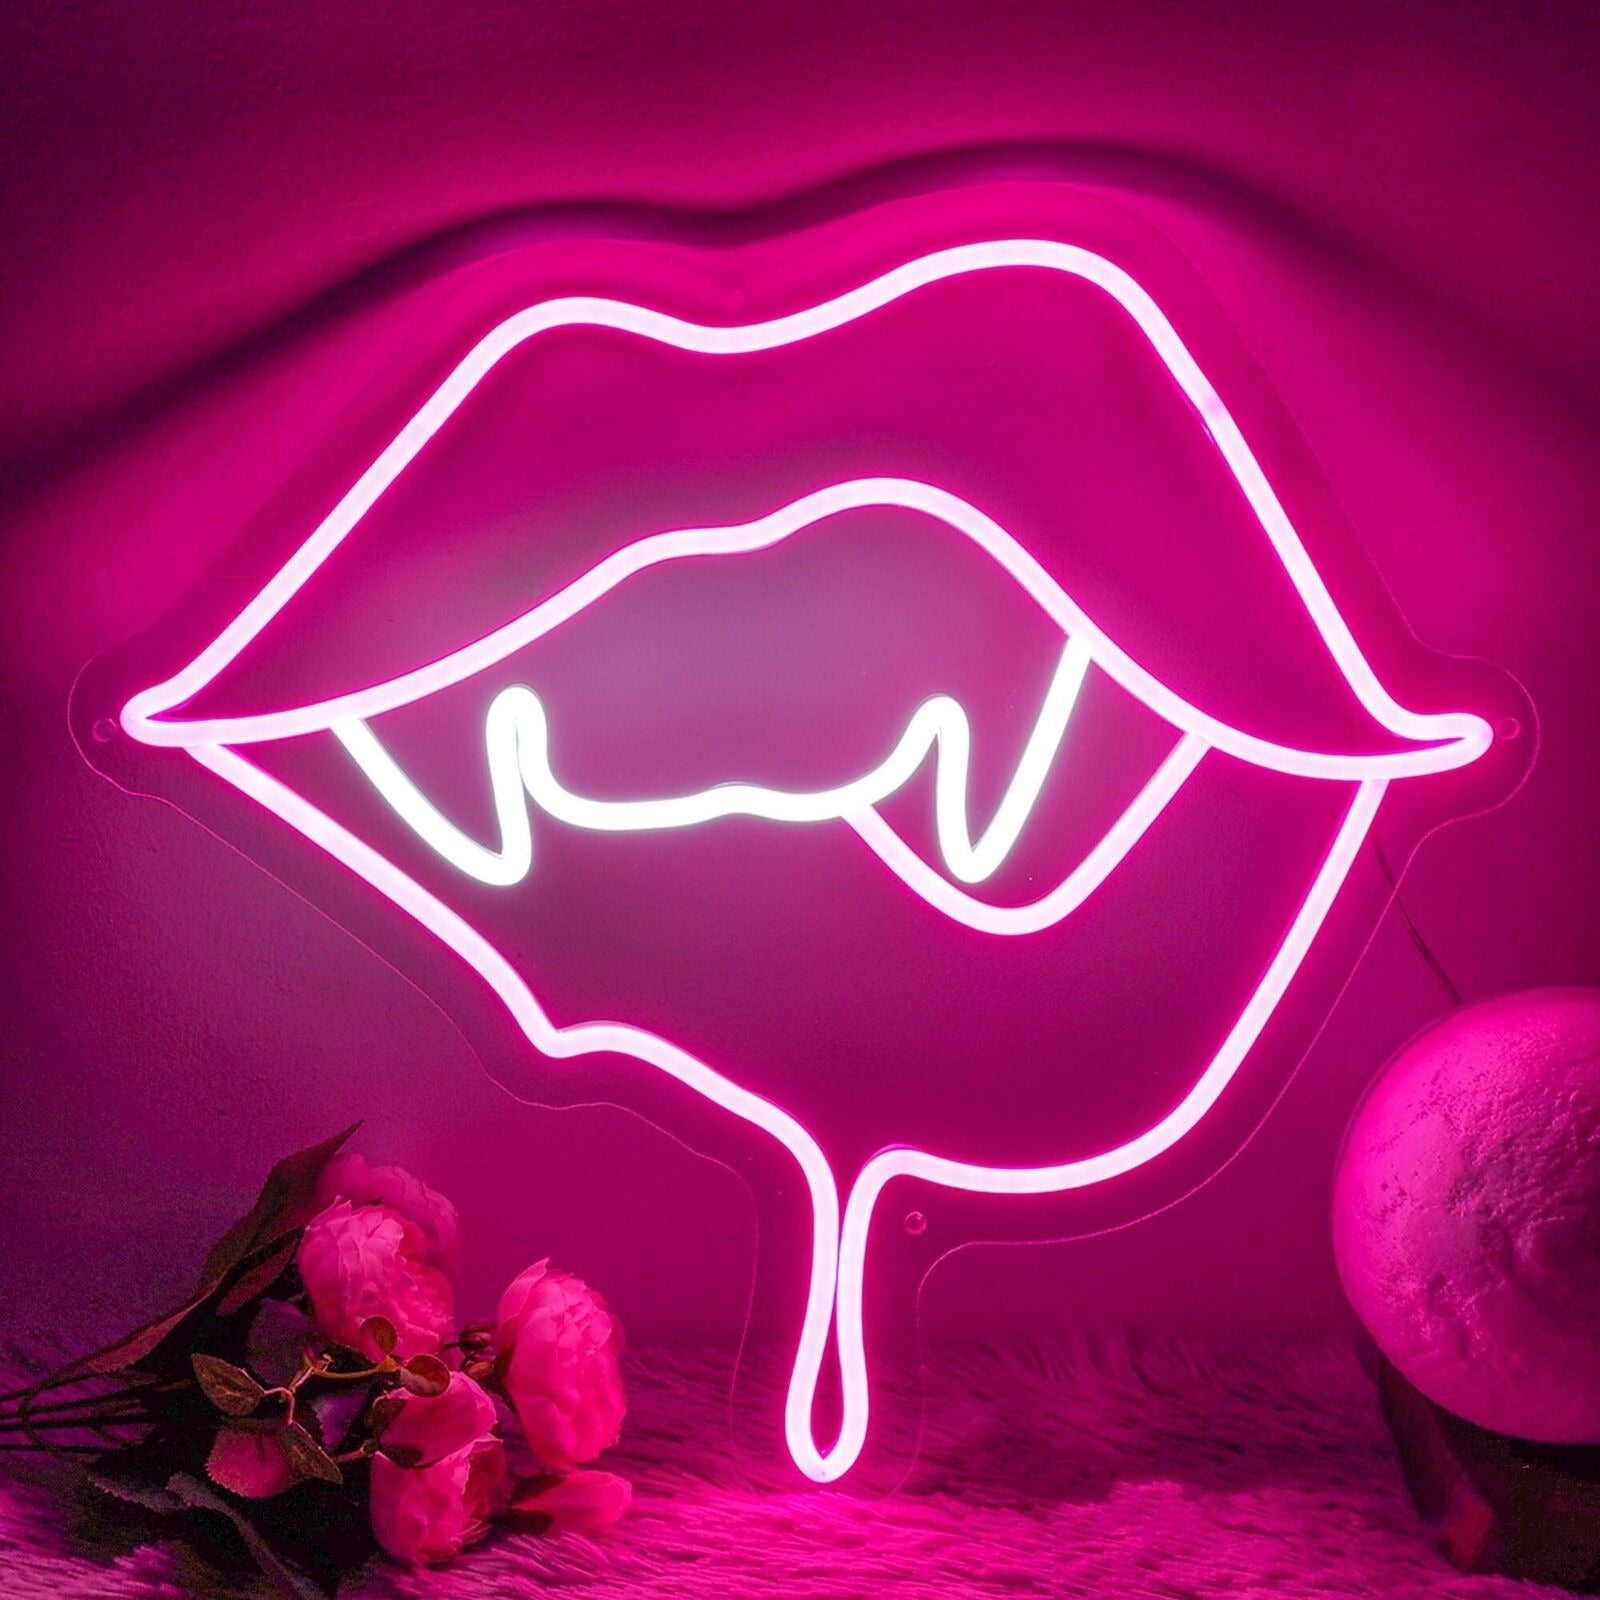 Bring home the LED neon sign that matches your style